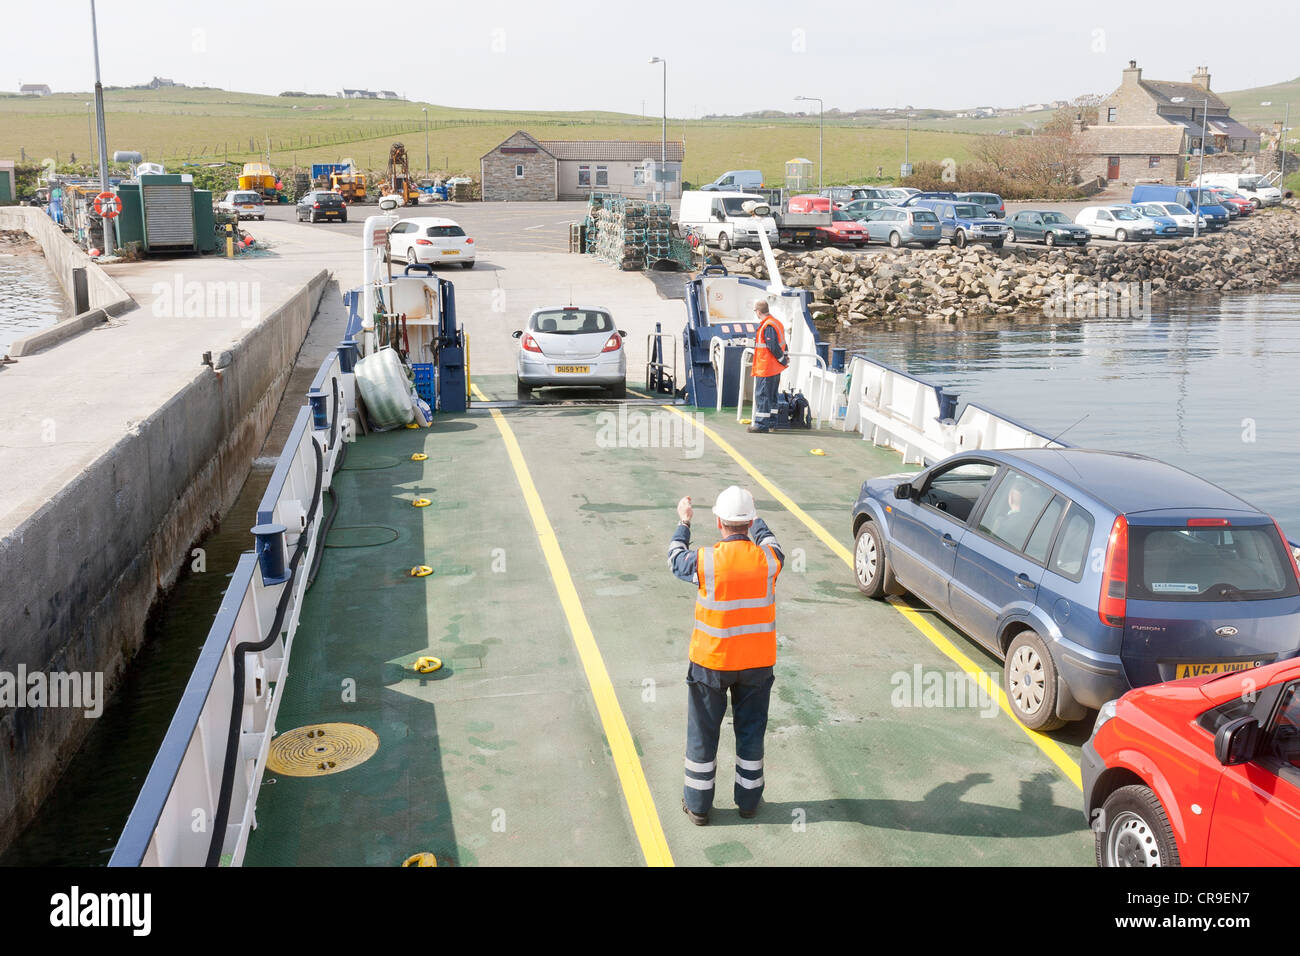 Tingwall Harbour - Orkney Isles, Scotland, the car ferry being loaded with cars Stock Photo